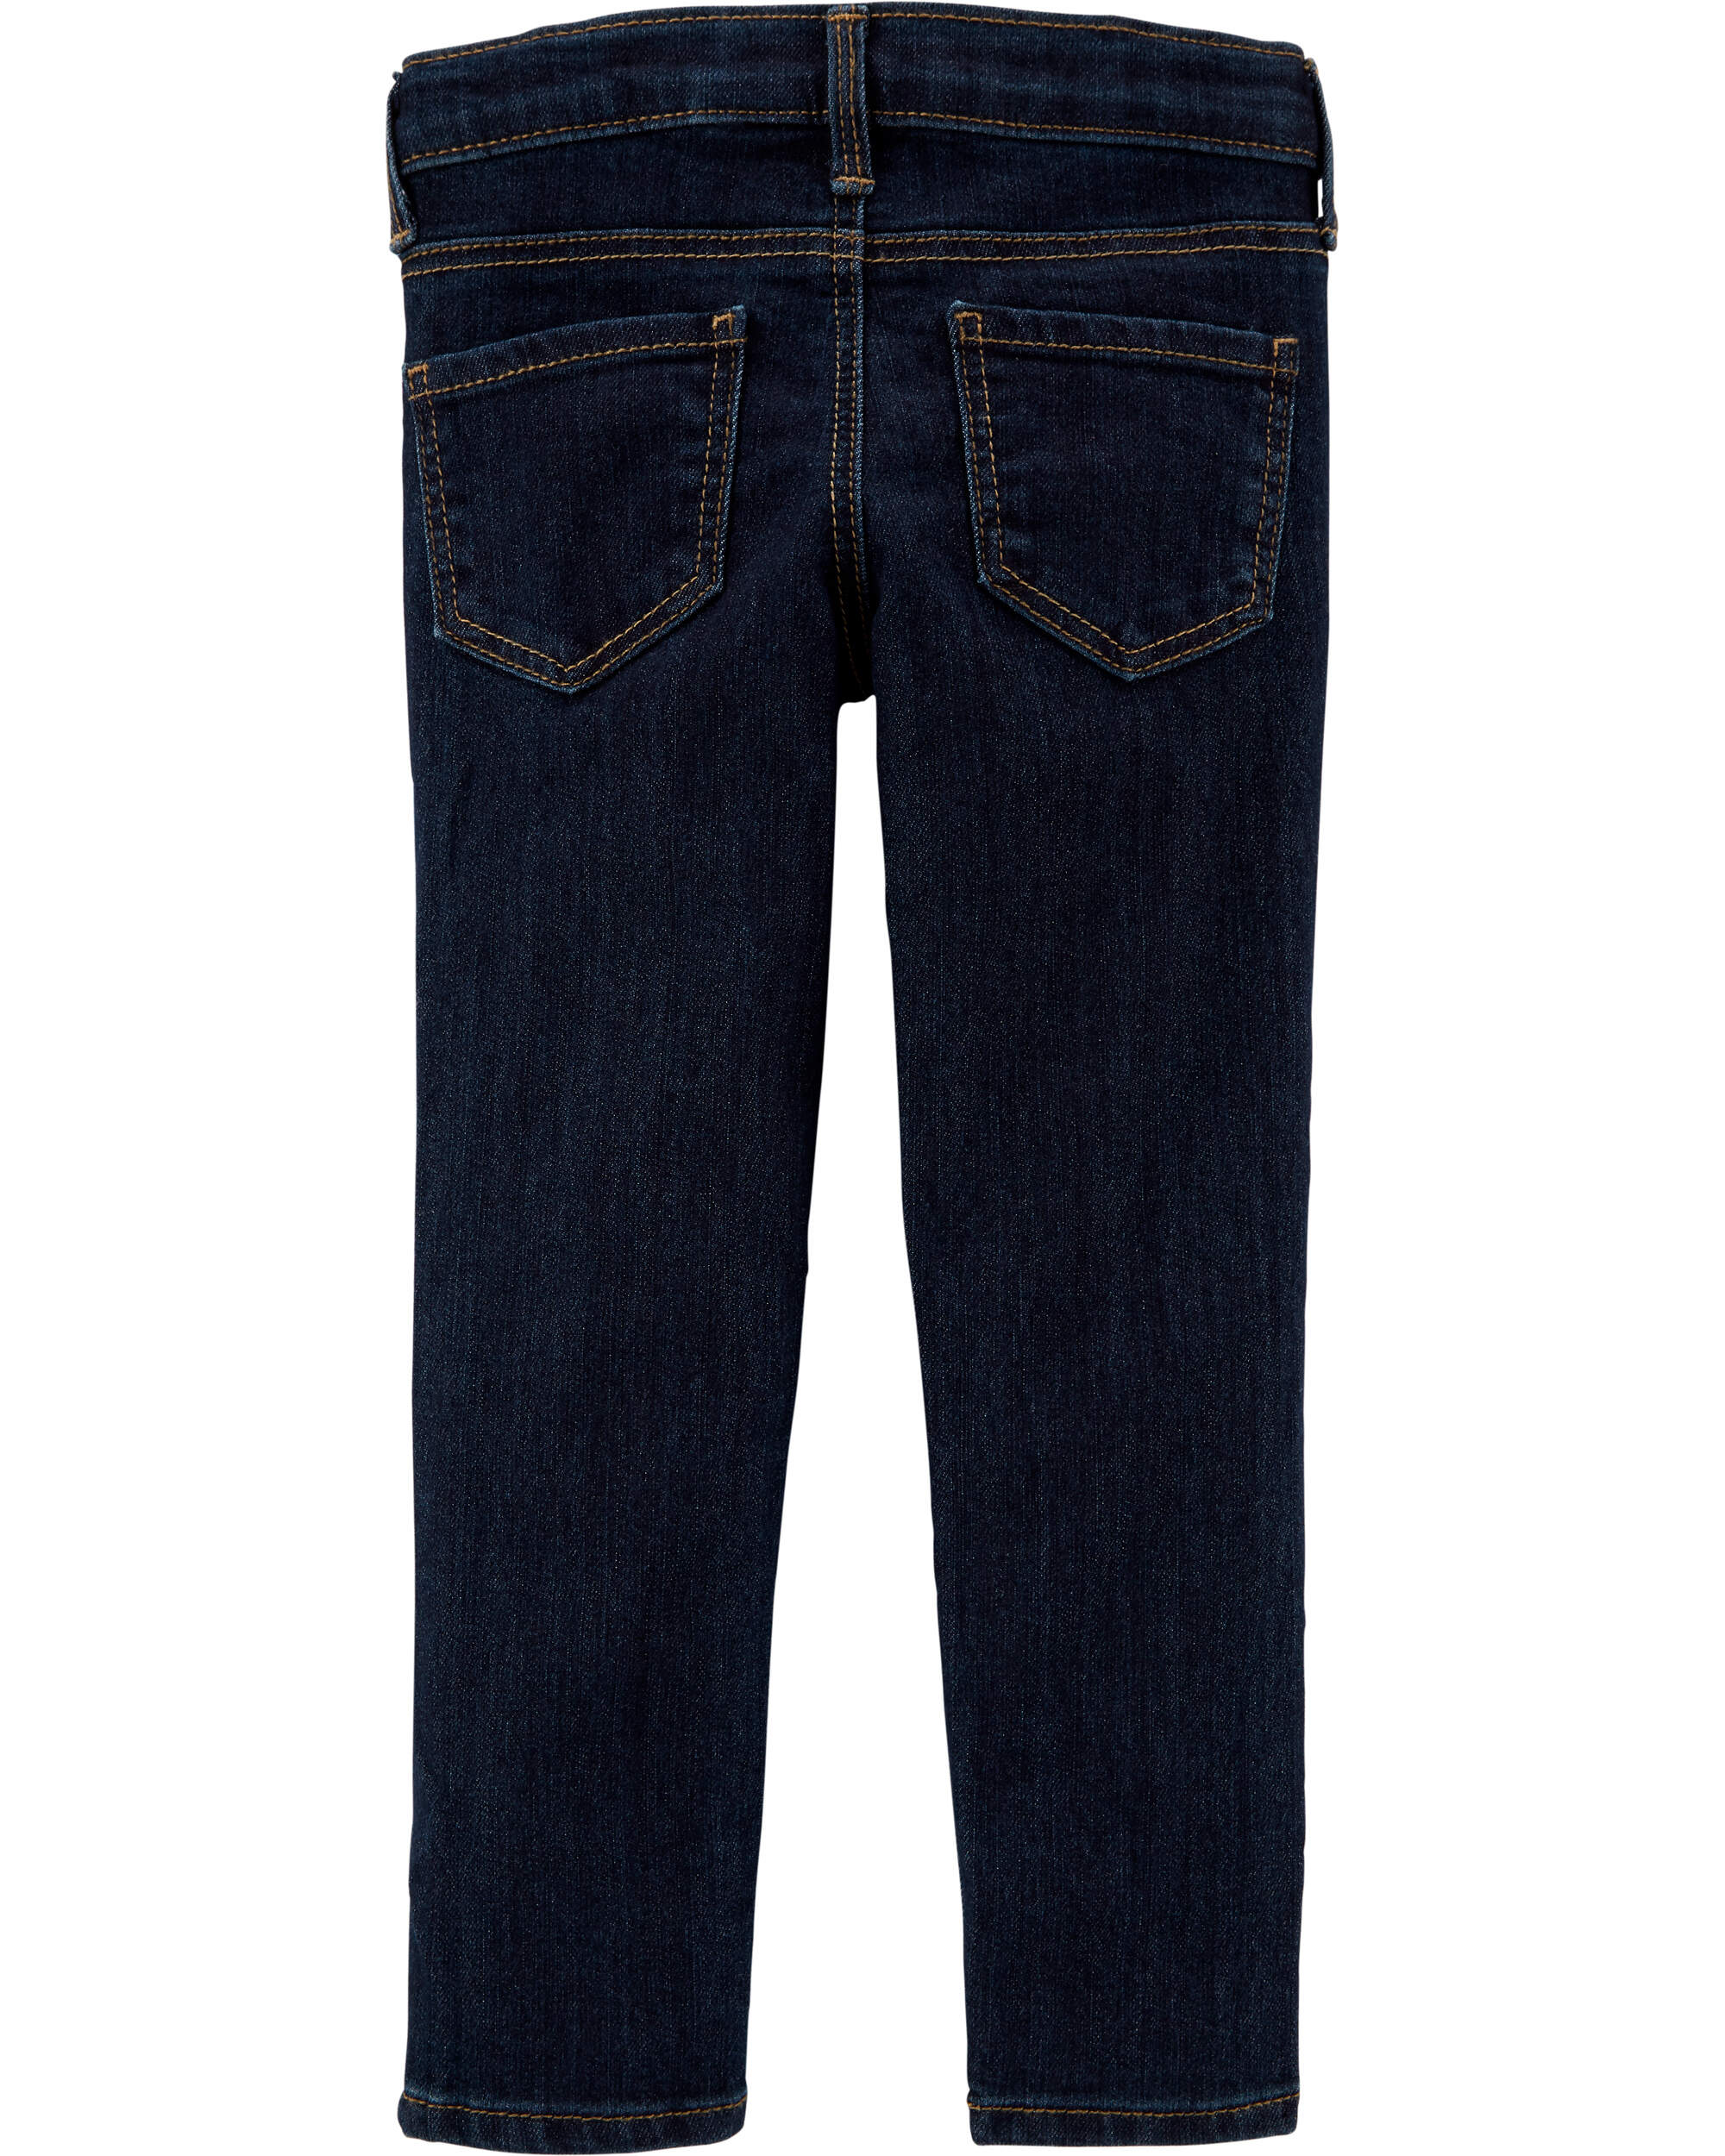 Toddler Heritage Rinse Super Skinny Jeans in Heritage Rinse | carters.com